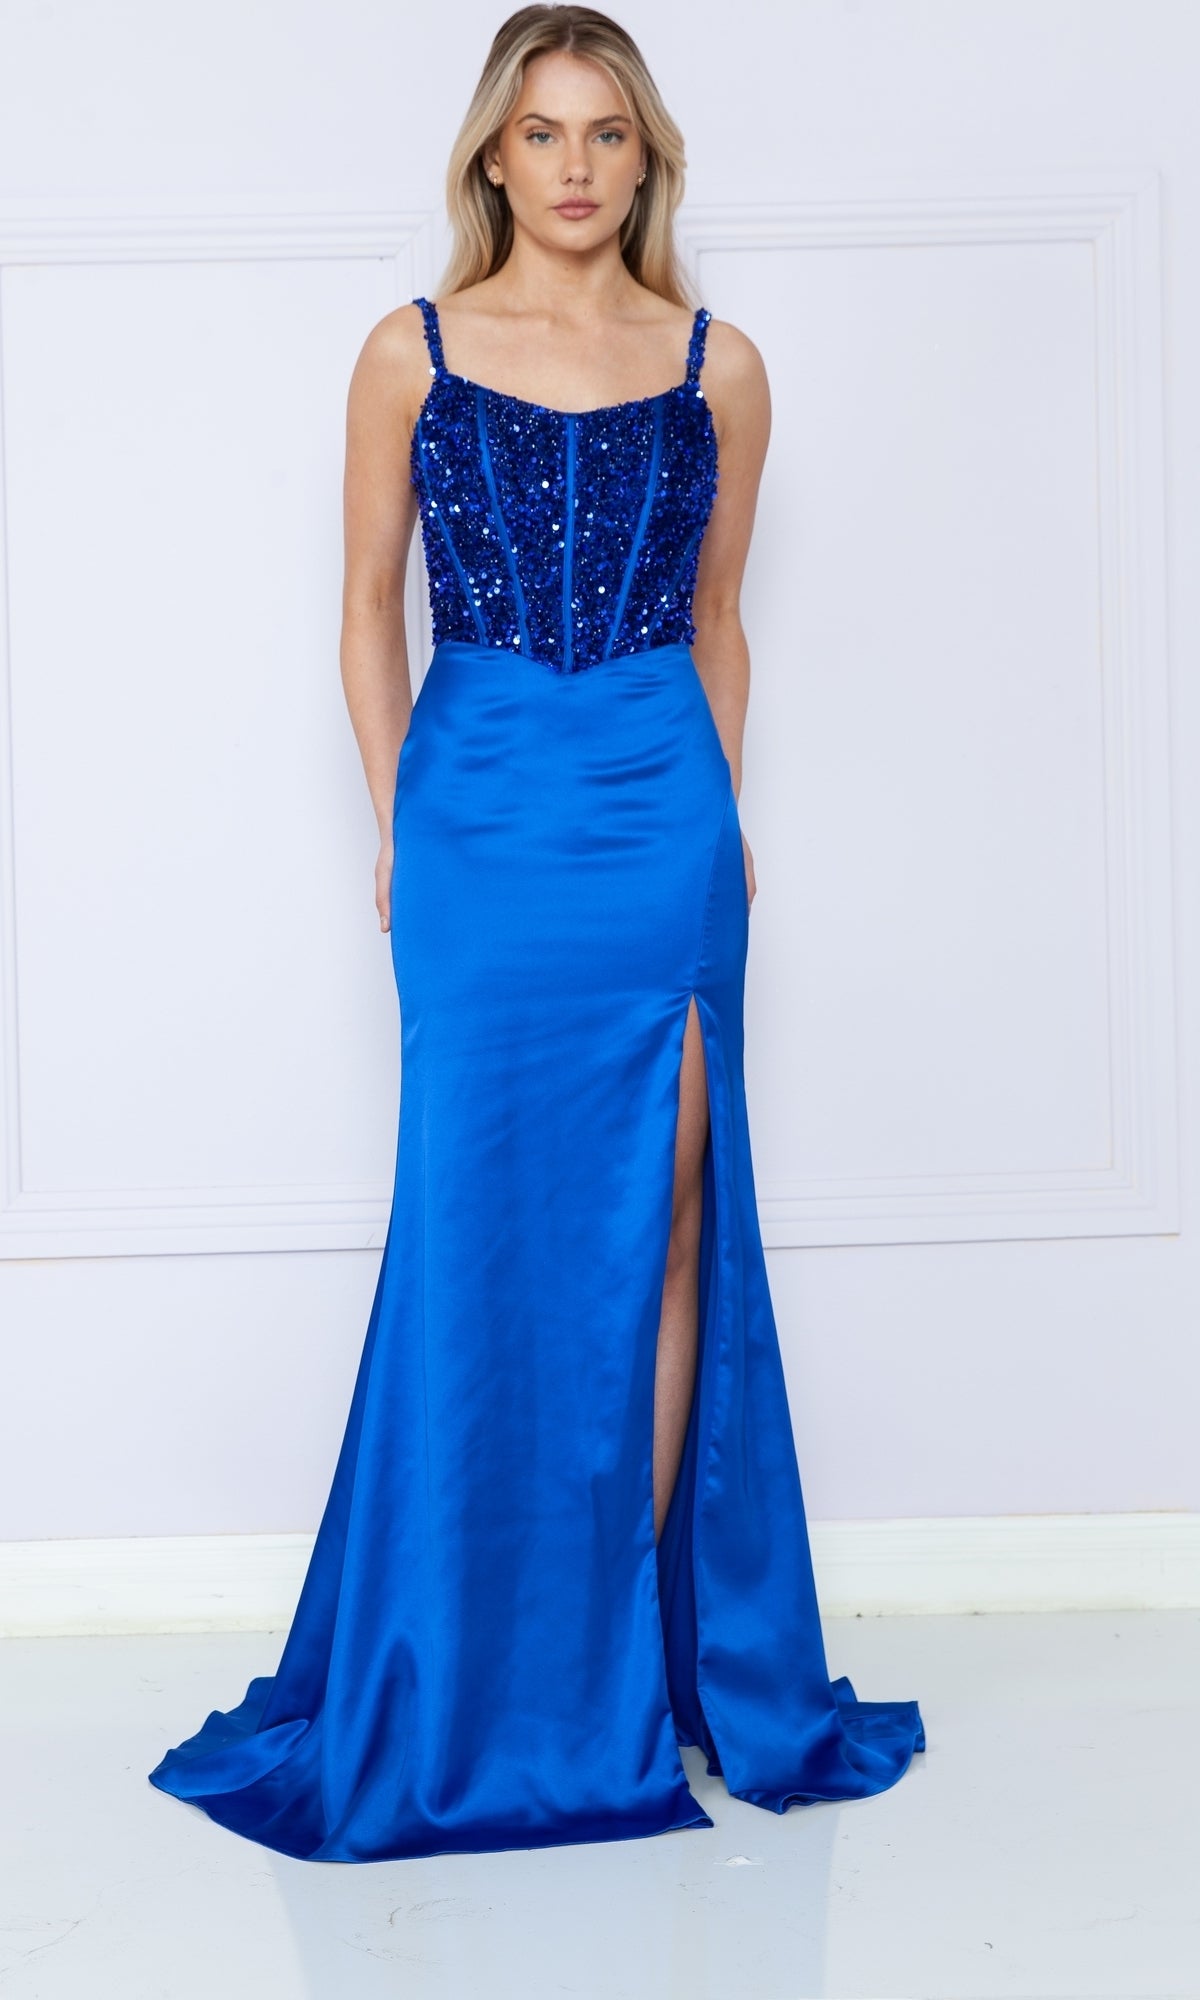 Lace-Up Sequin-Bodice Long Satin Prom Dress 9176